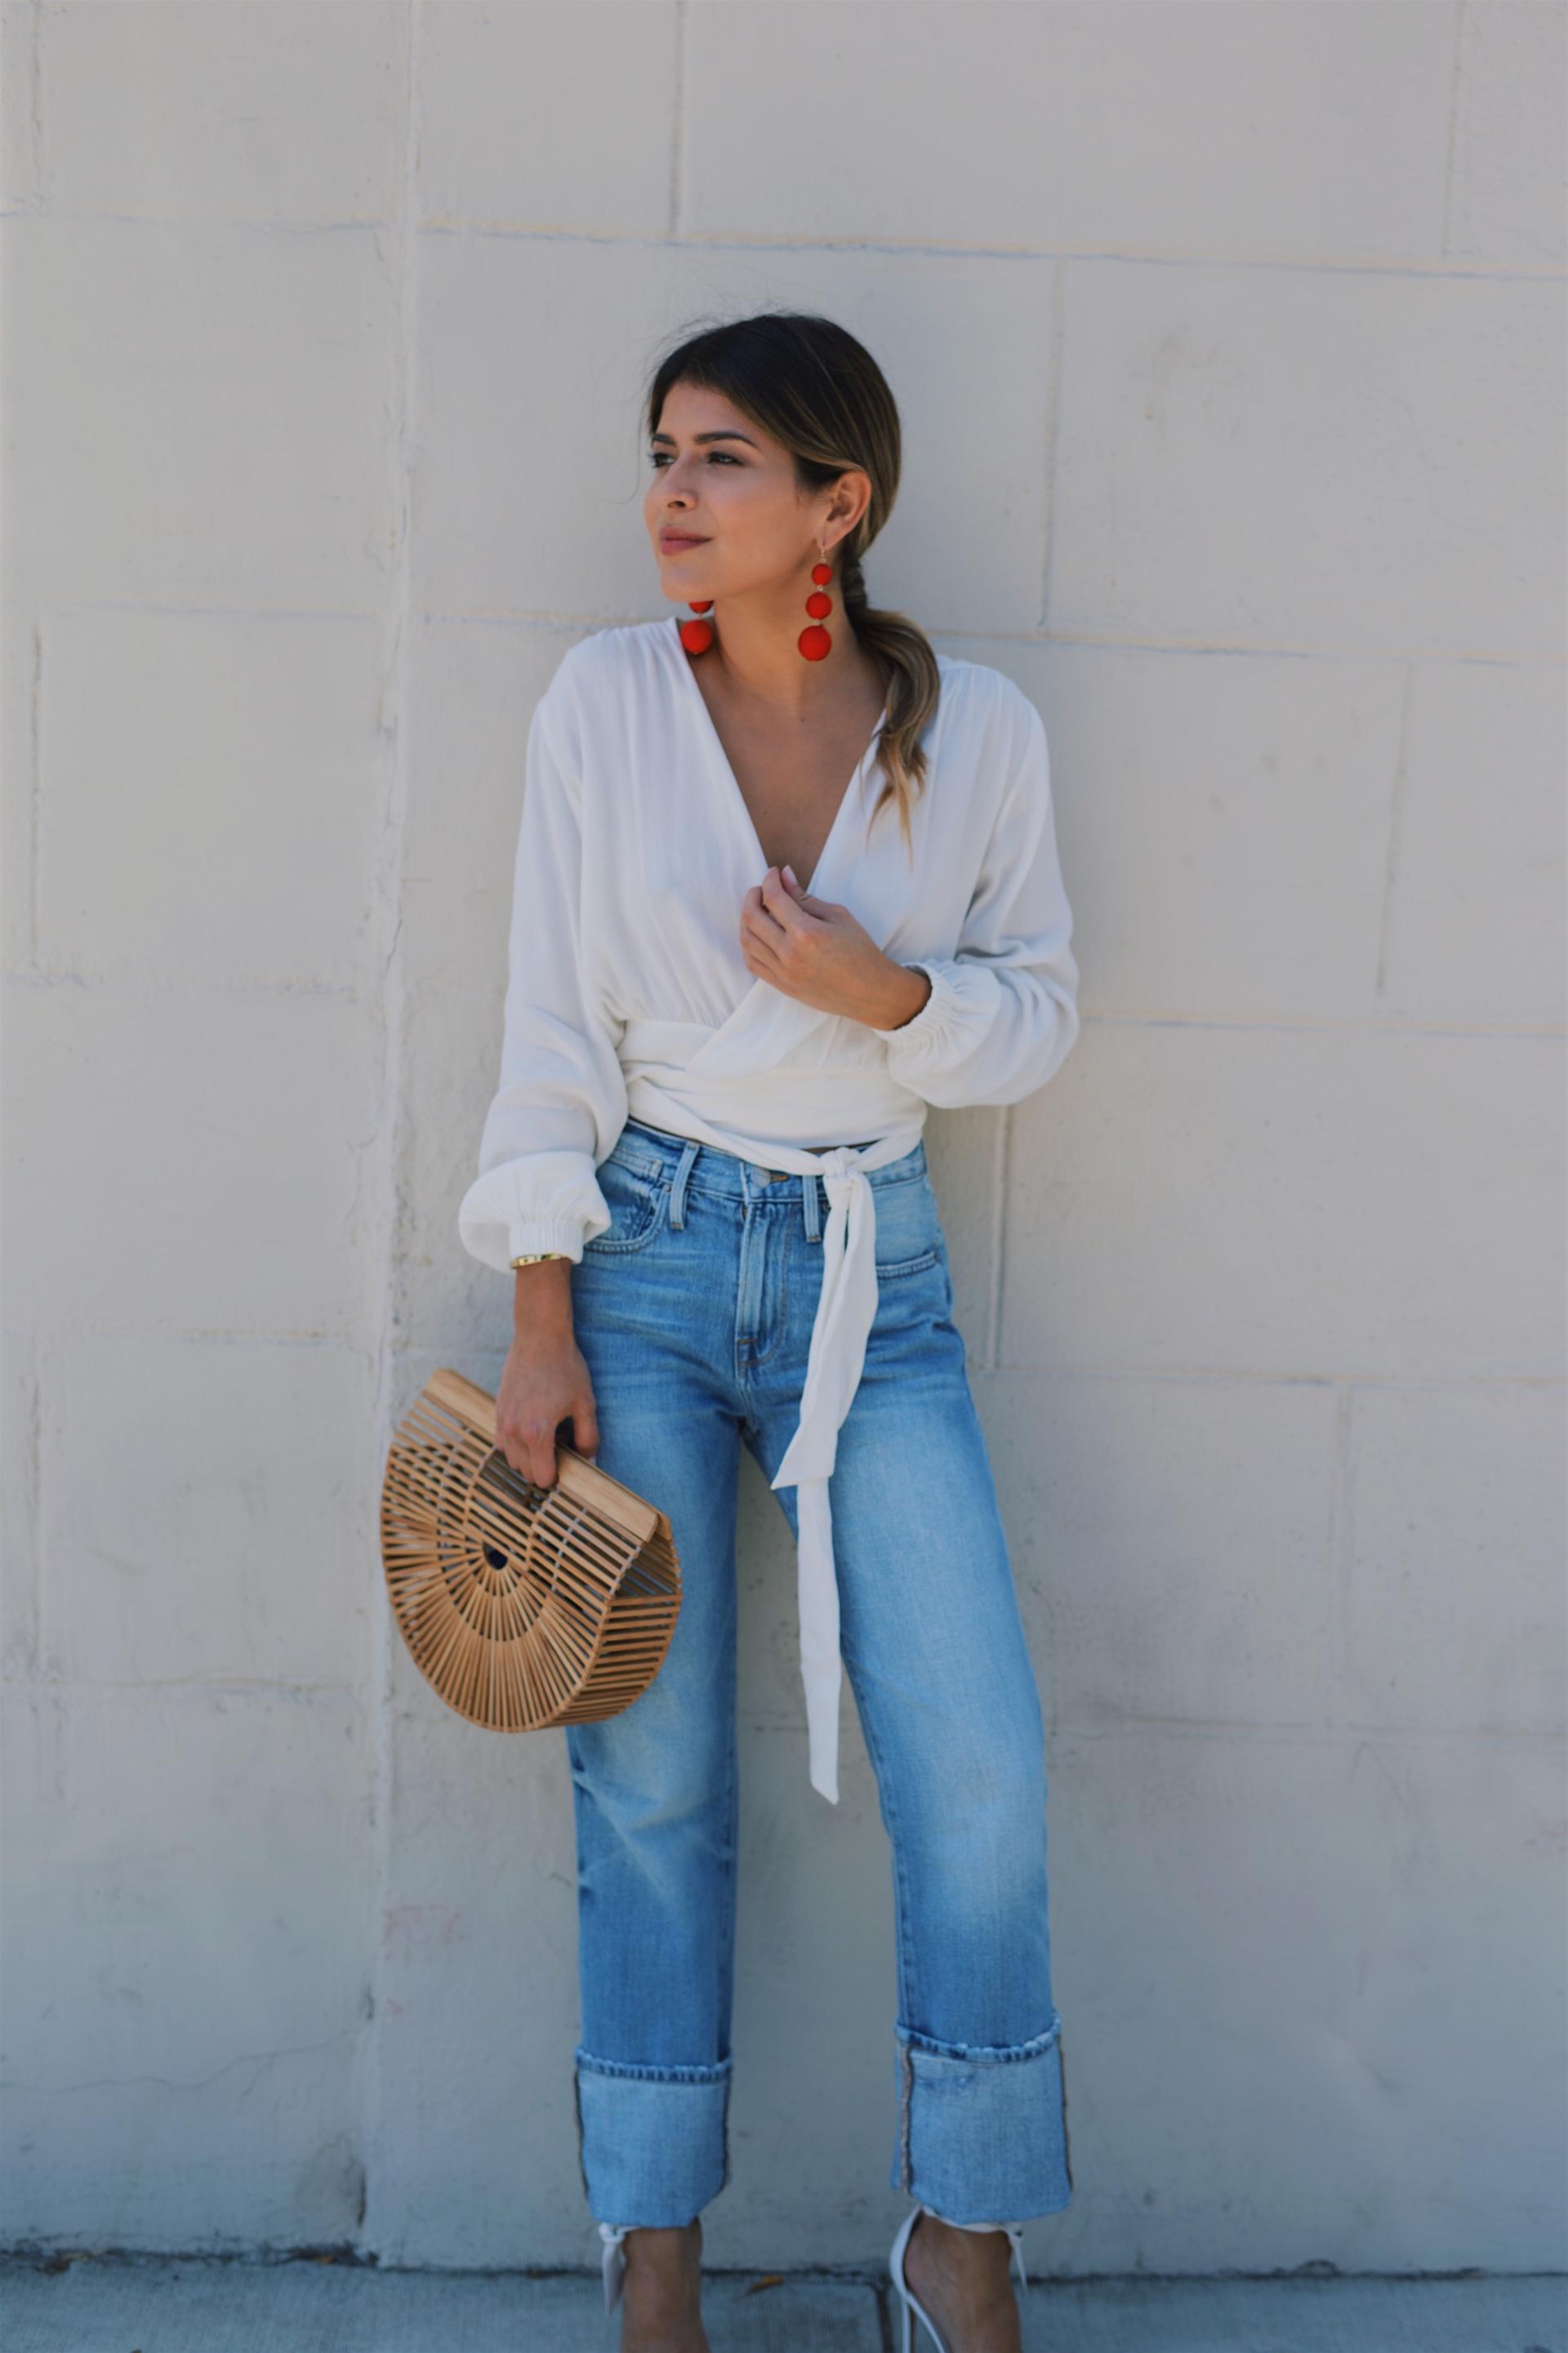 How to style denim in July: Cuffed jeans // The Girl From Panama